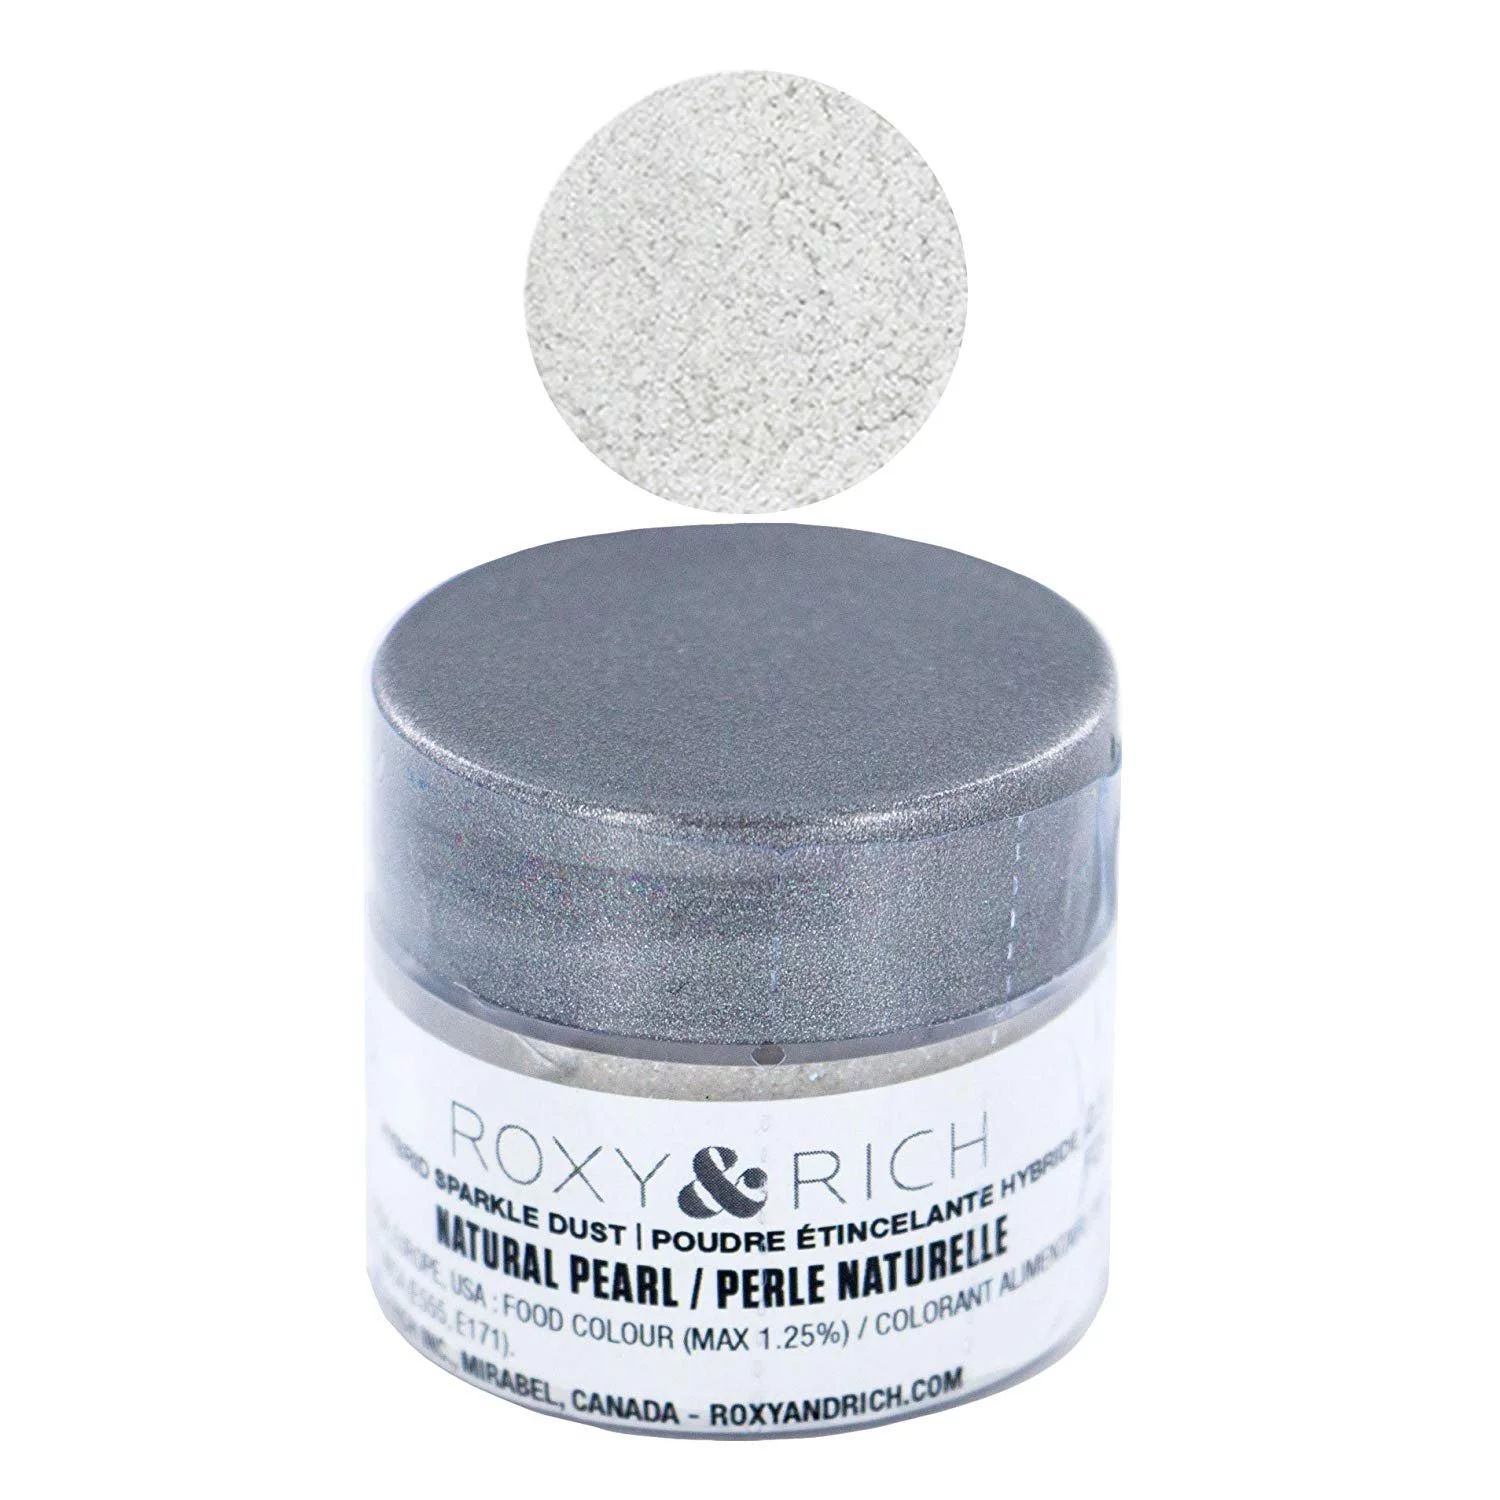 Edible Hybrid Sparkle Dust, Natural Pearl , 2.5 Grams by Roxy & Rich | Walmart (US)